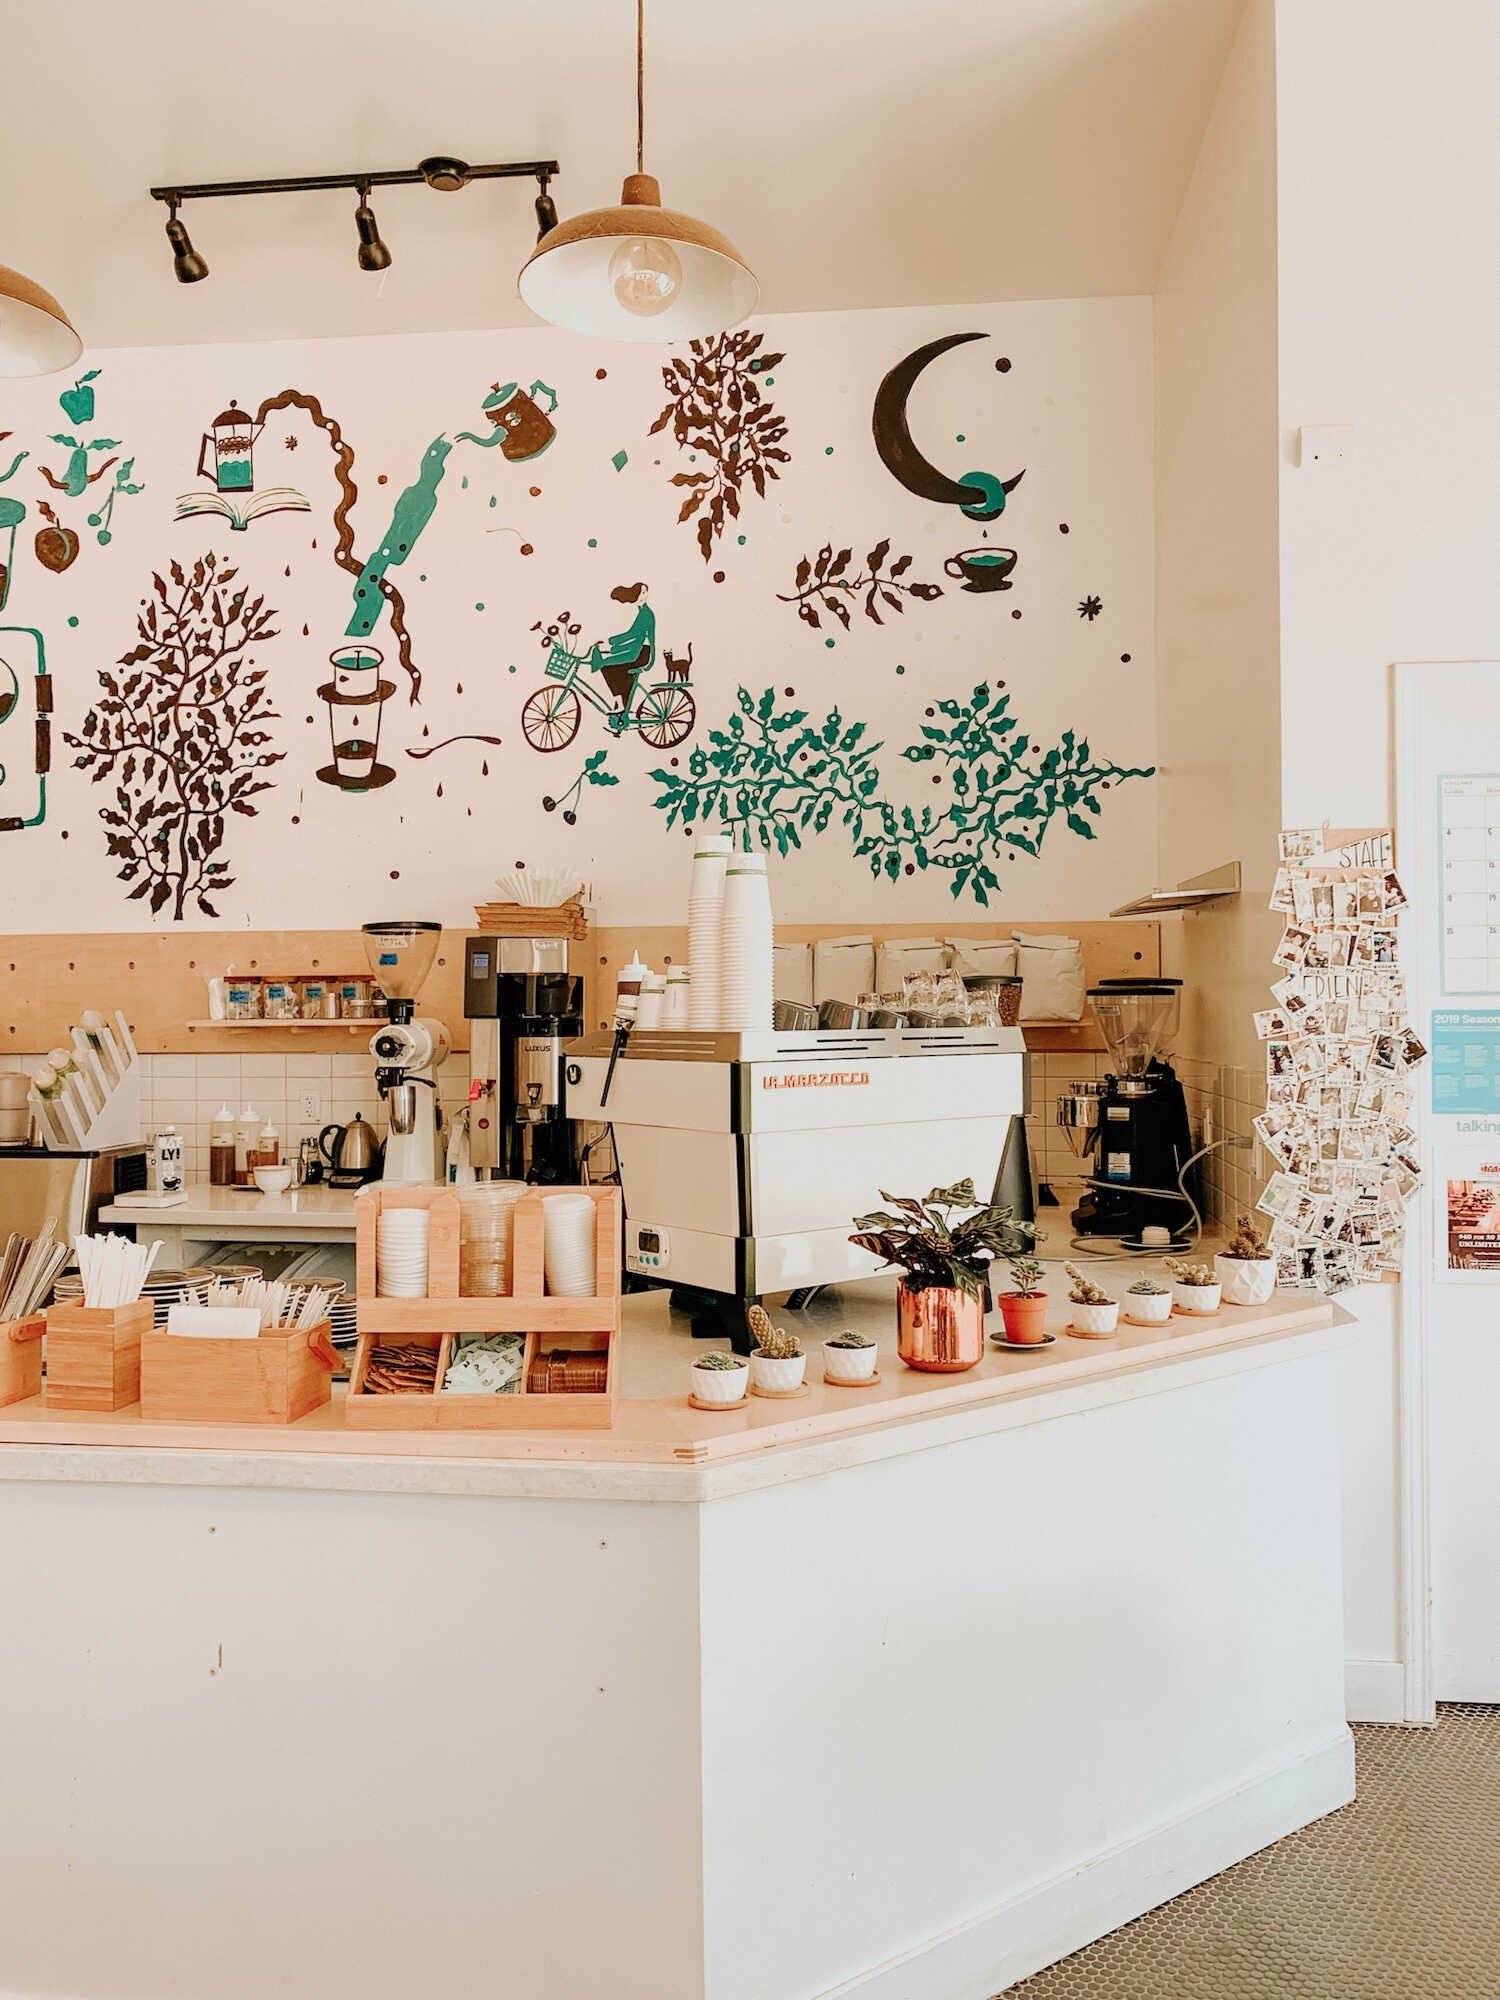 Top 10 Instagrammable Places in San Jose - Academic Coffee Company